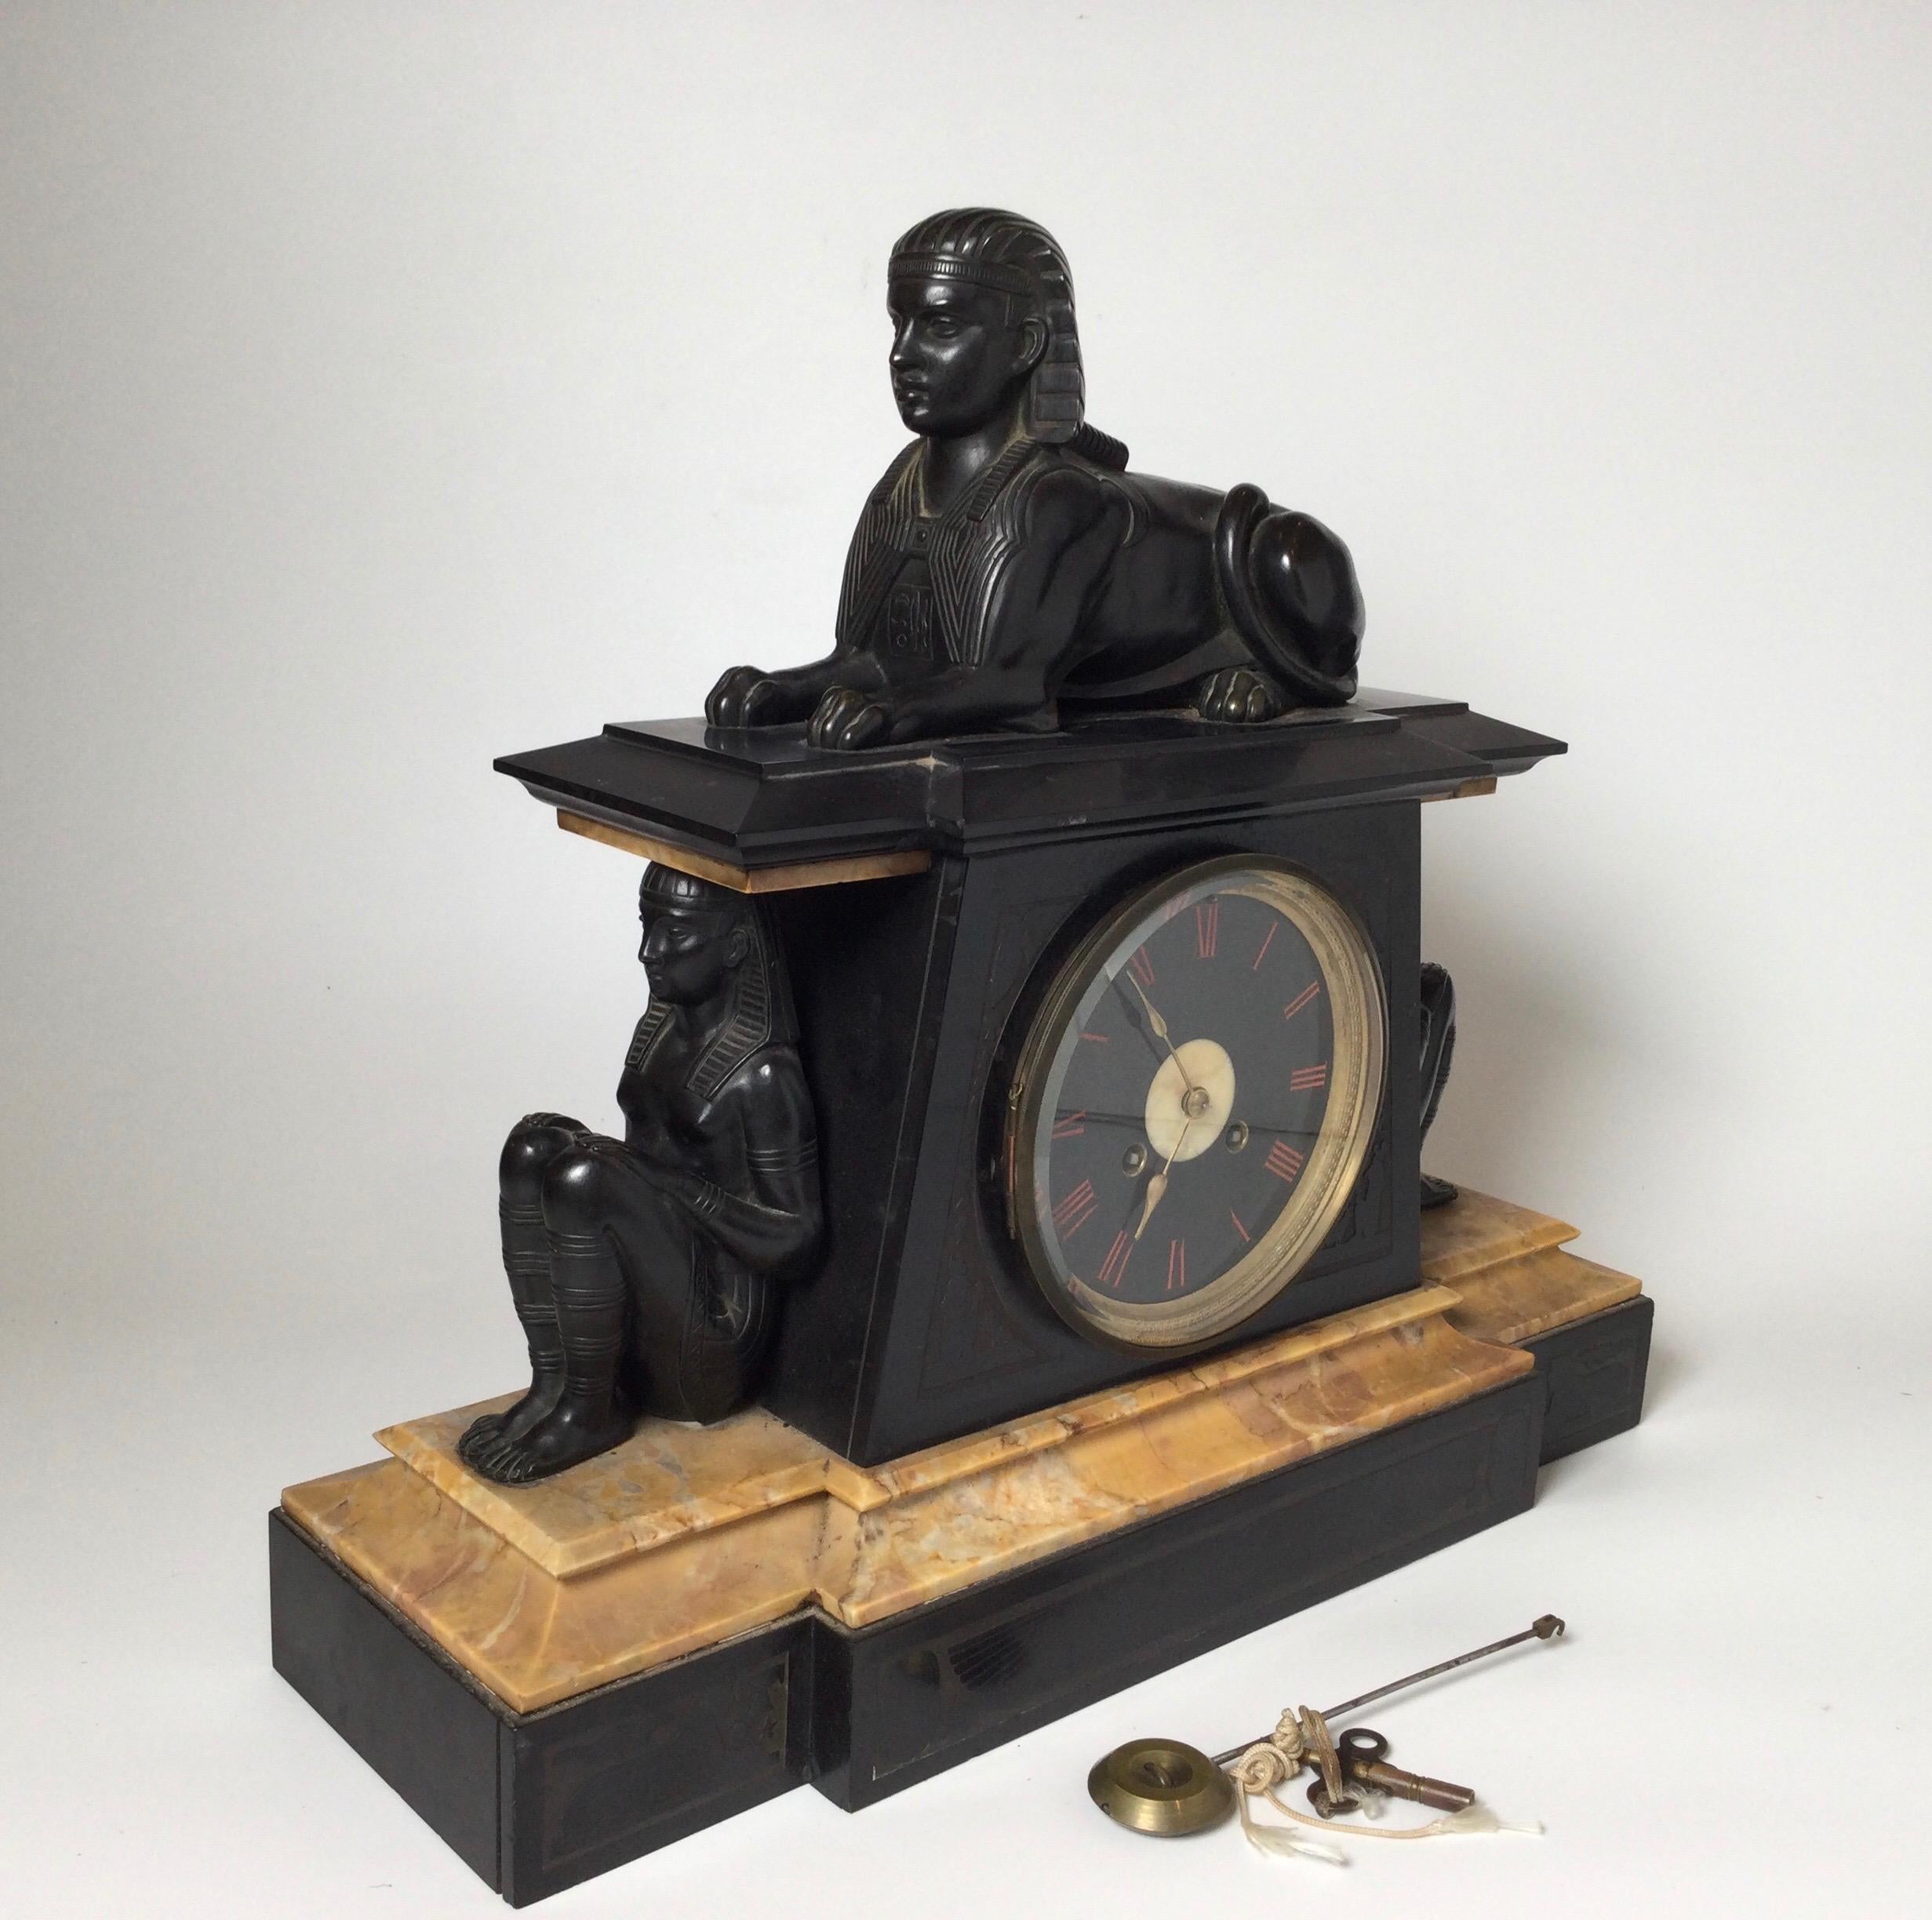 A patinated bronze Egyptian revival figural clock with sphynx top. The bronze figures also flank each side. The Belgian slate with siena marble accents with deep rose colored roman numerals. The clock is running with its original pendulum and key. 8